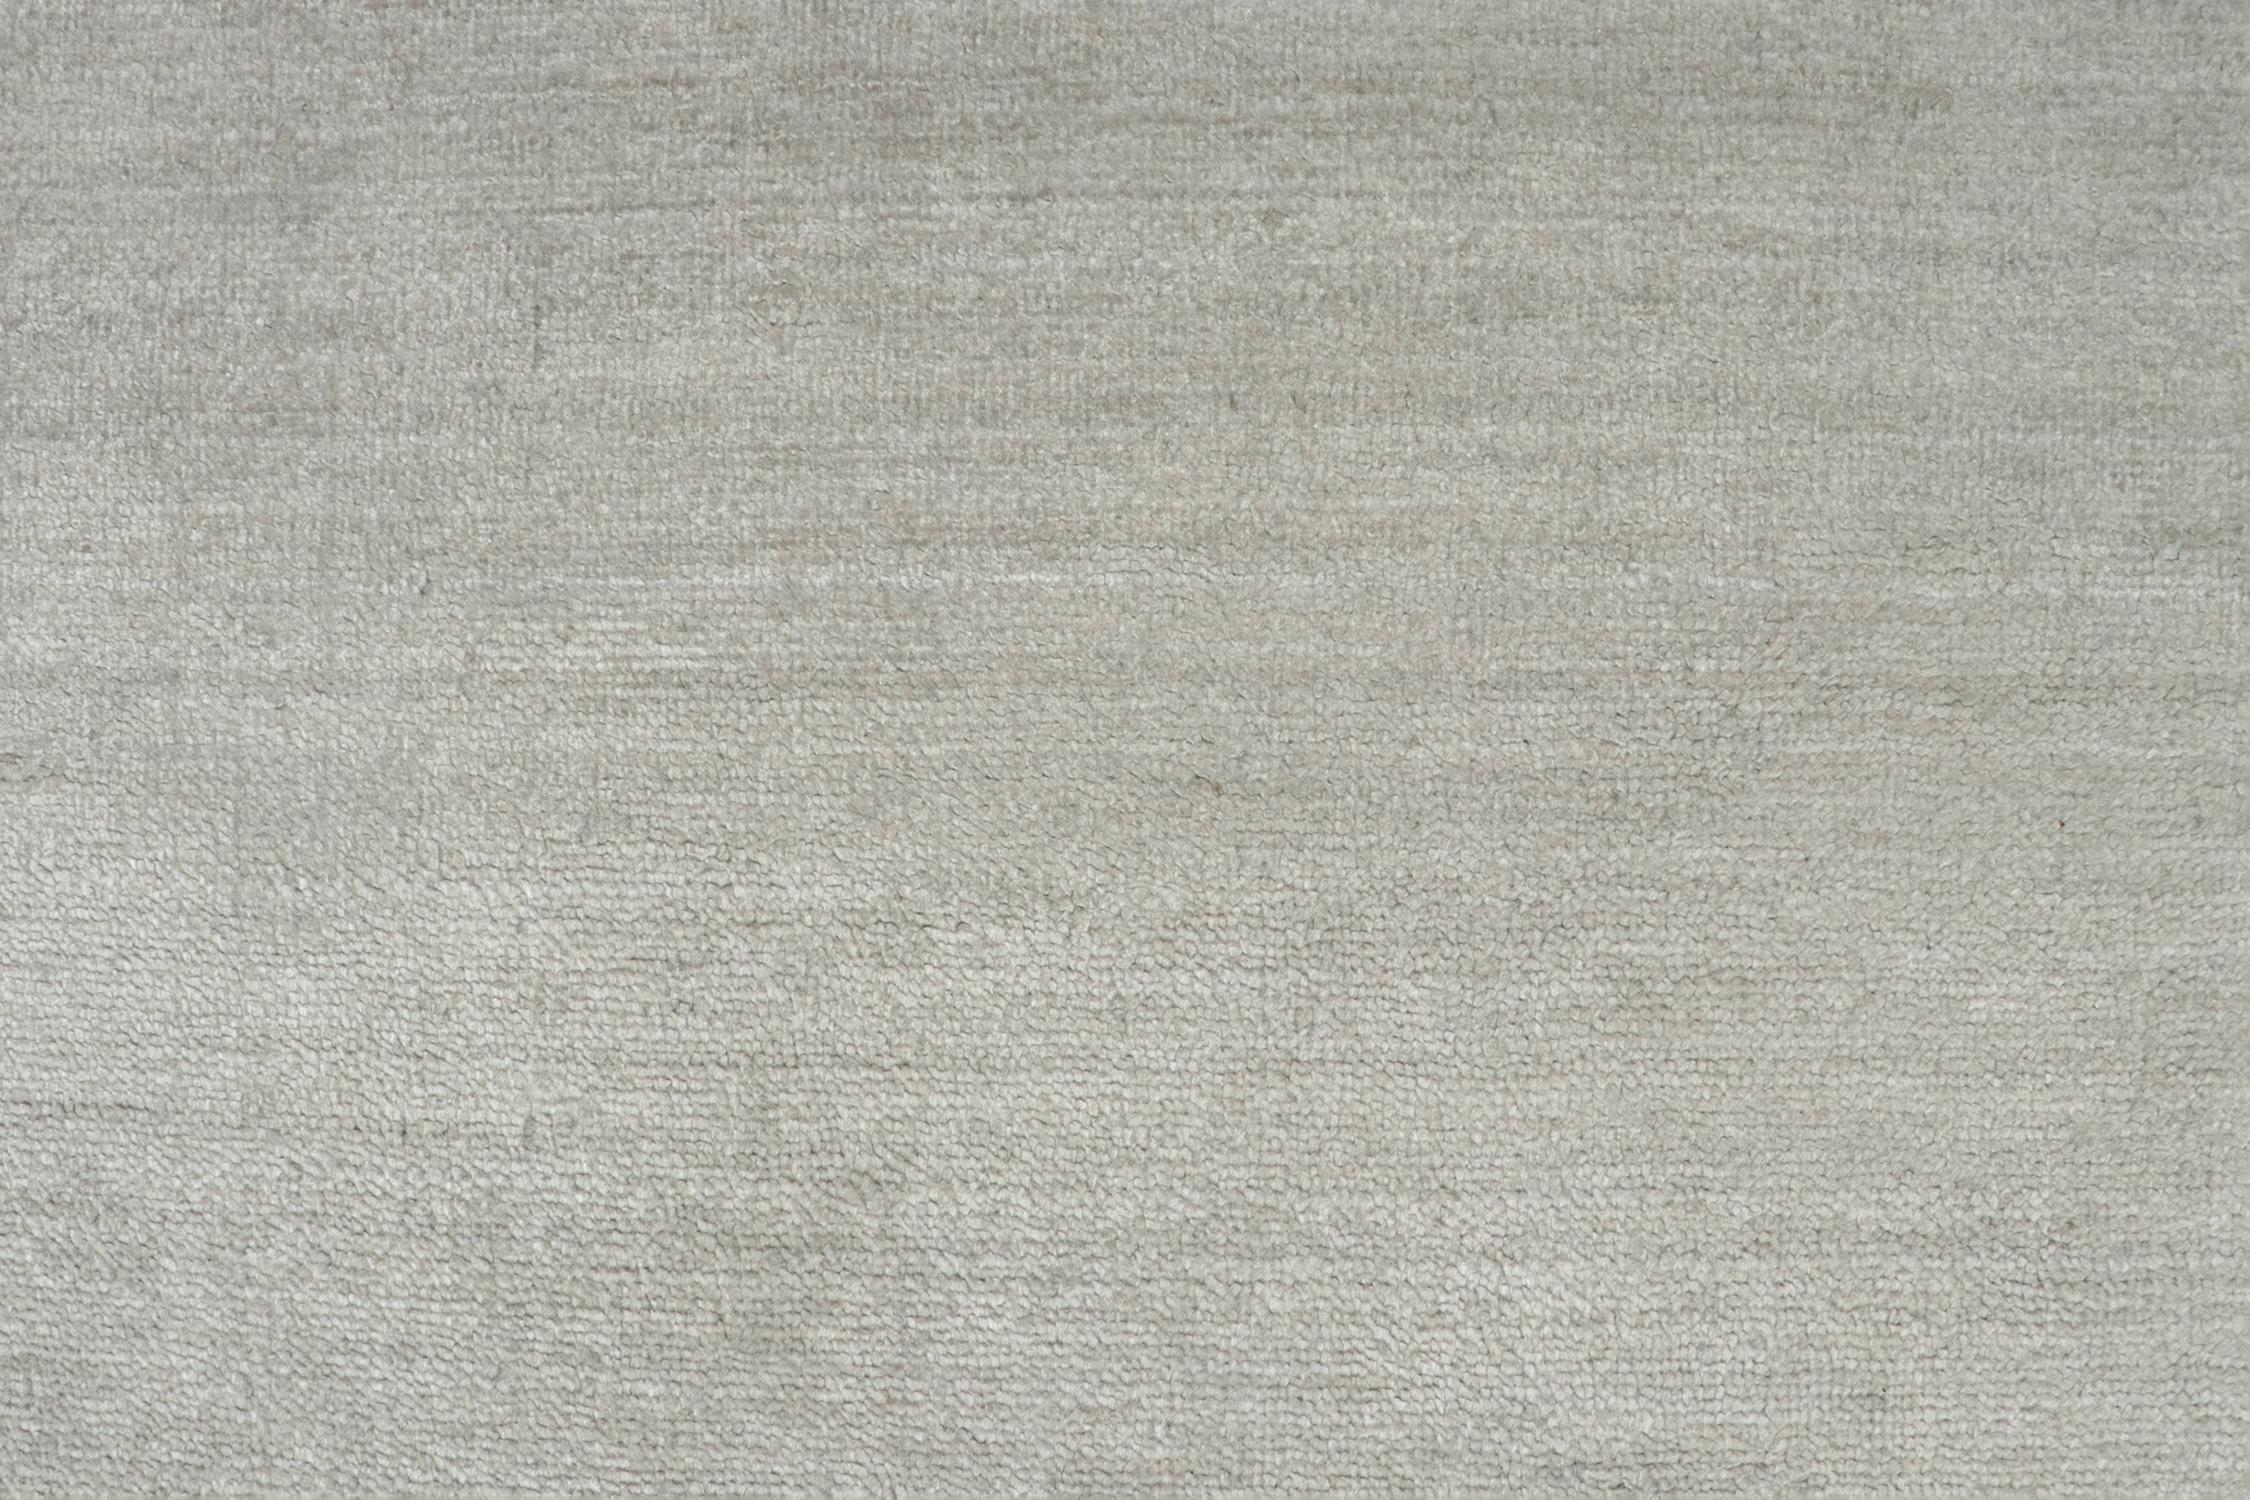 Contemporary Rug & Kilim’s Modern Rug in Solid Gray and Off-White Striae For Sale